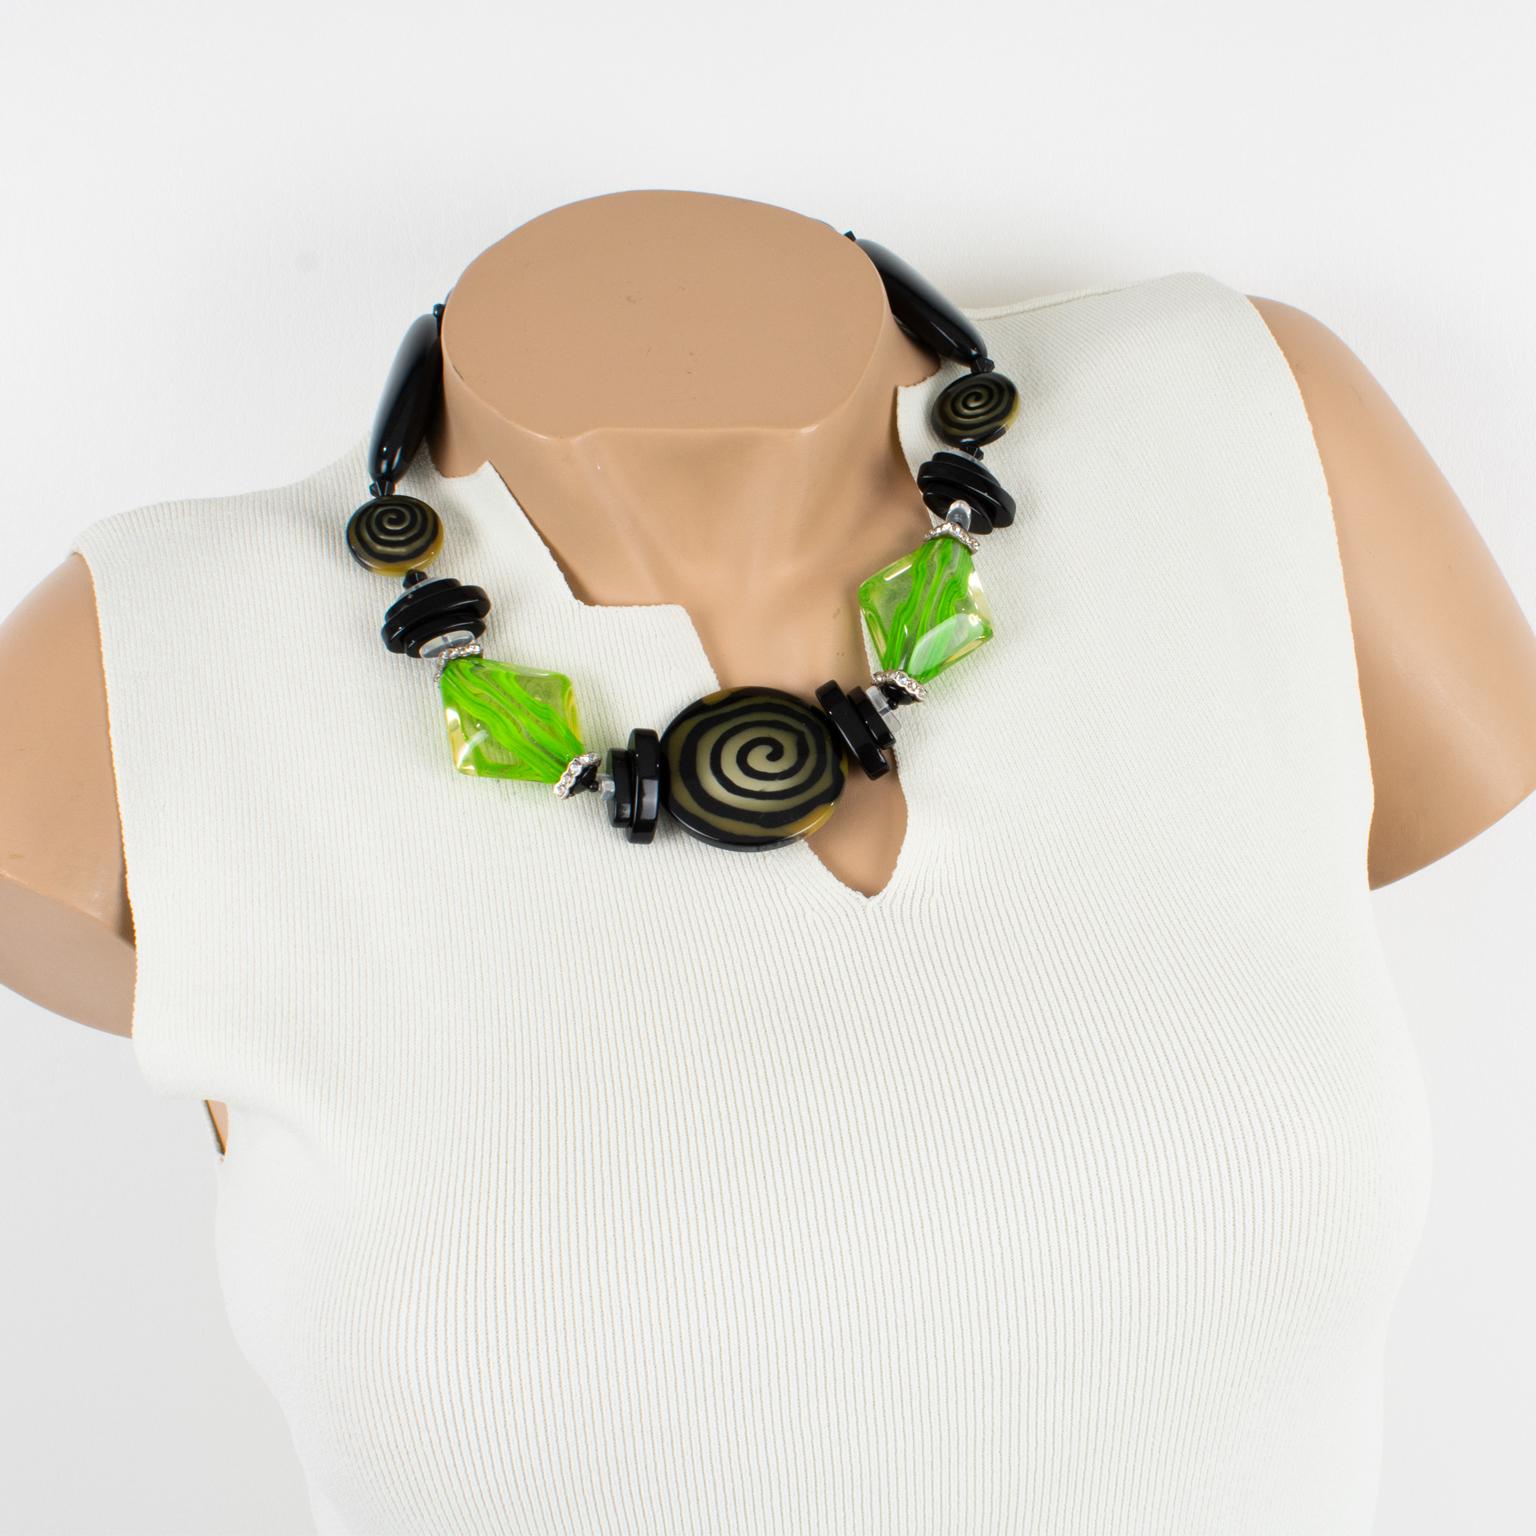 Elegant Angela Caputi, made in Italy resin choker necklace. Working on black and green contrast, this necklace features chunky carved pebble beads with a central rounded bead with a spiral textured pattern. Her color matching is always extremely